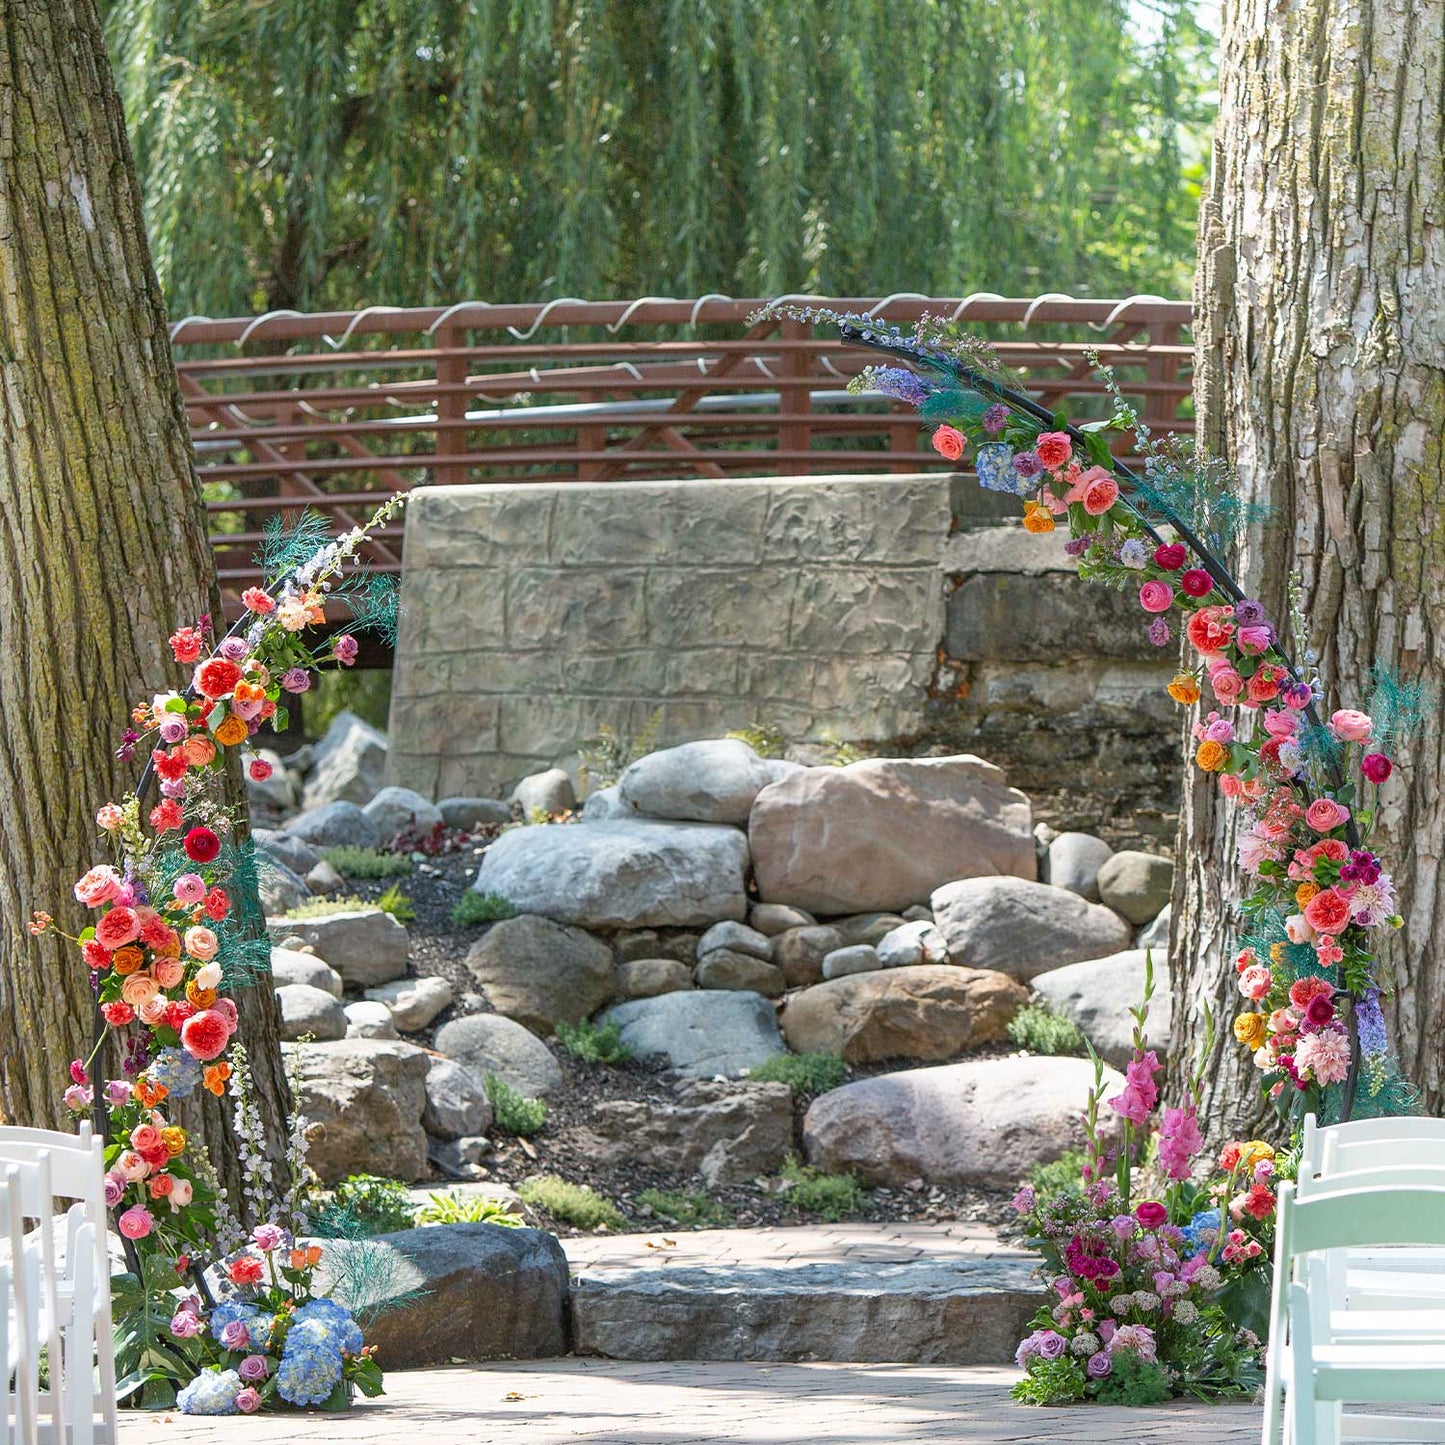 46 & Spruce outdoor wedding arch: vibrant half-circle floral display with pink, orange, and purple flowers. Set against a rocky path and a rustic bridge backdrop.